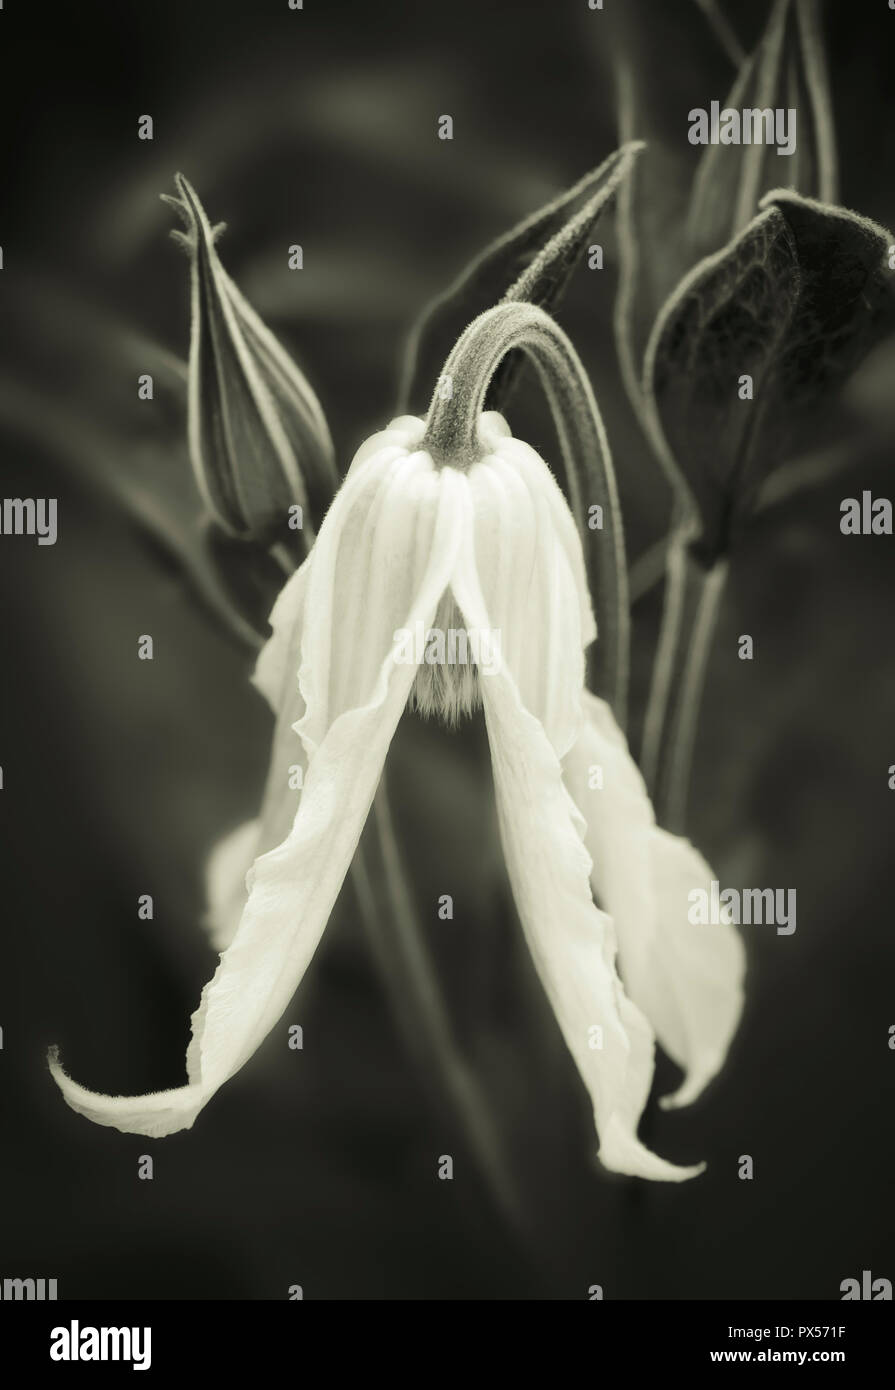 Flower-head and bud of Clematis ‘Hakuree’ (integrifolia type), in tinted monochrome Stock Photo